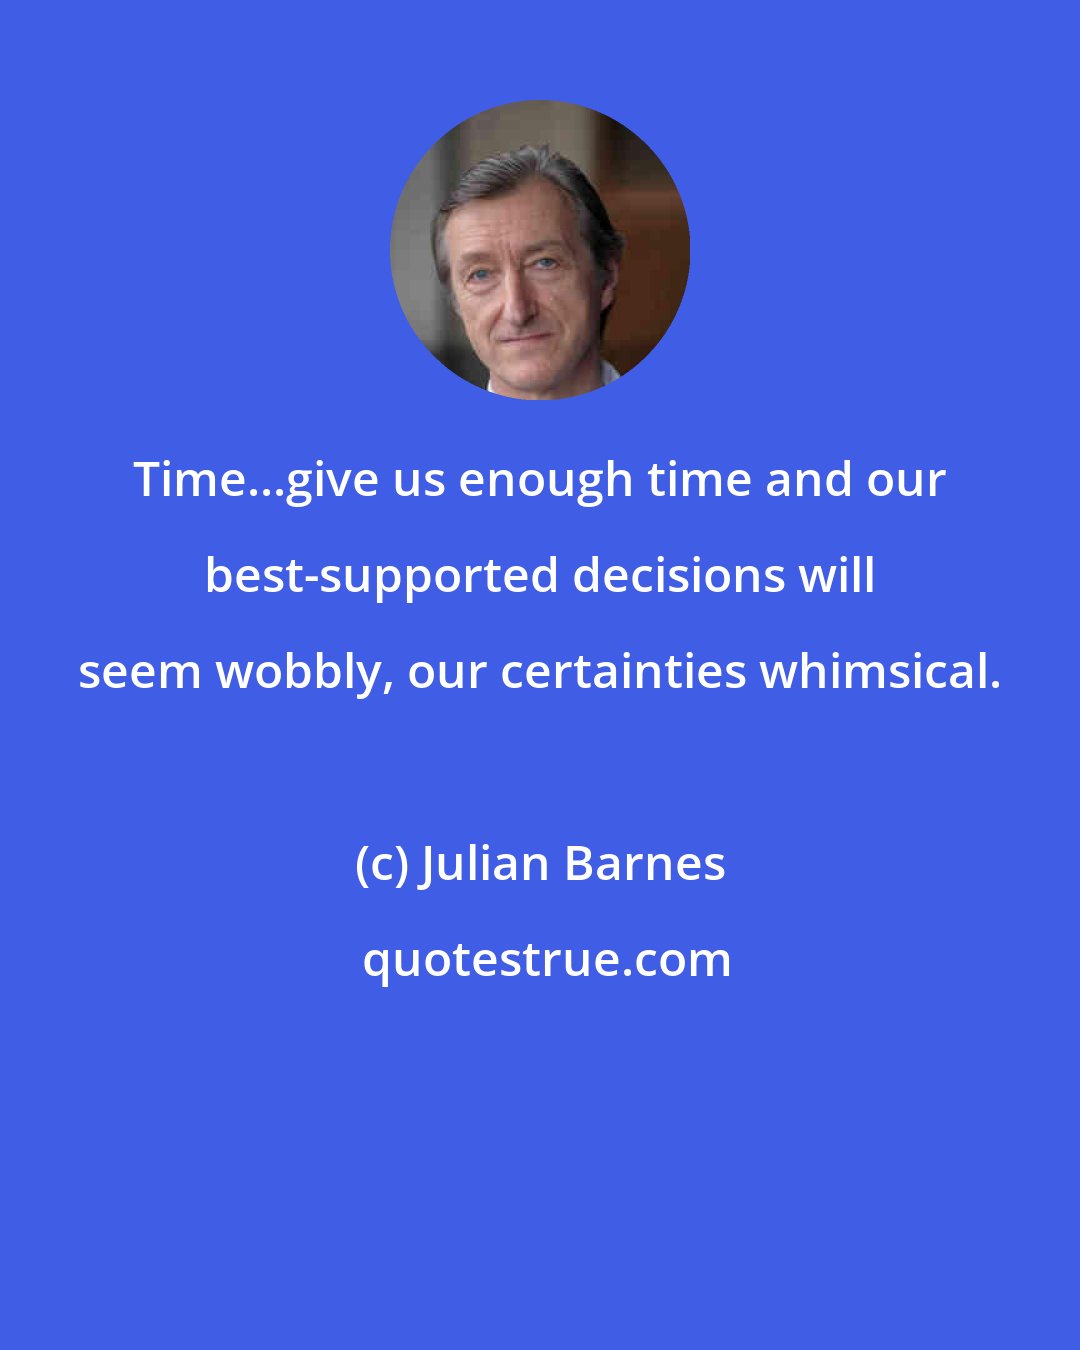 Julian Barnes: Time...give us enough time and our best-supported decisions will seem wobbly, our certainties whimsical.